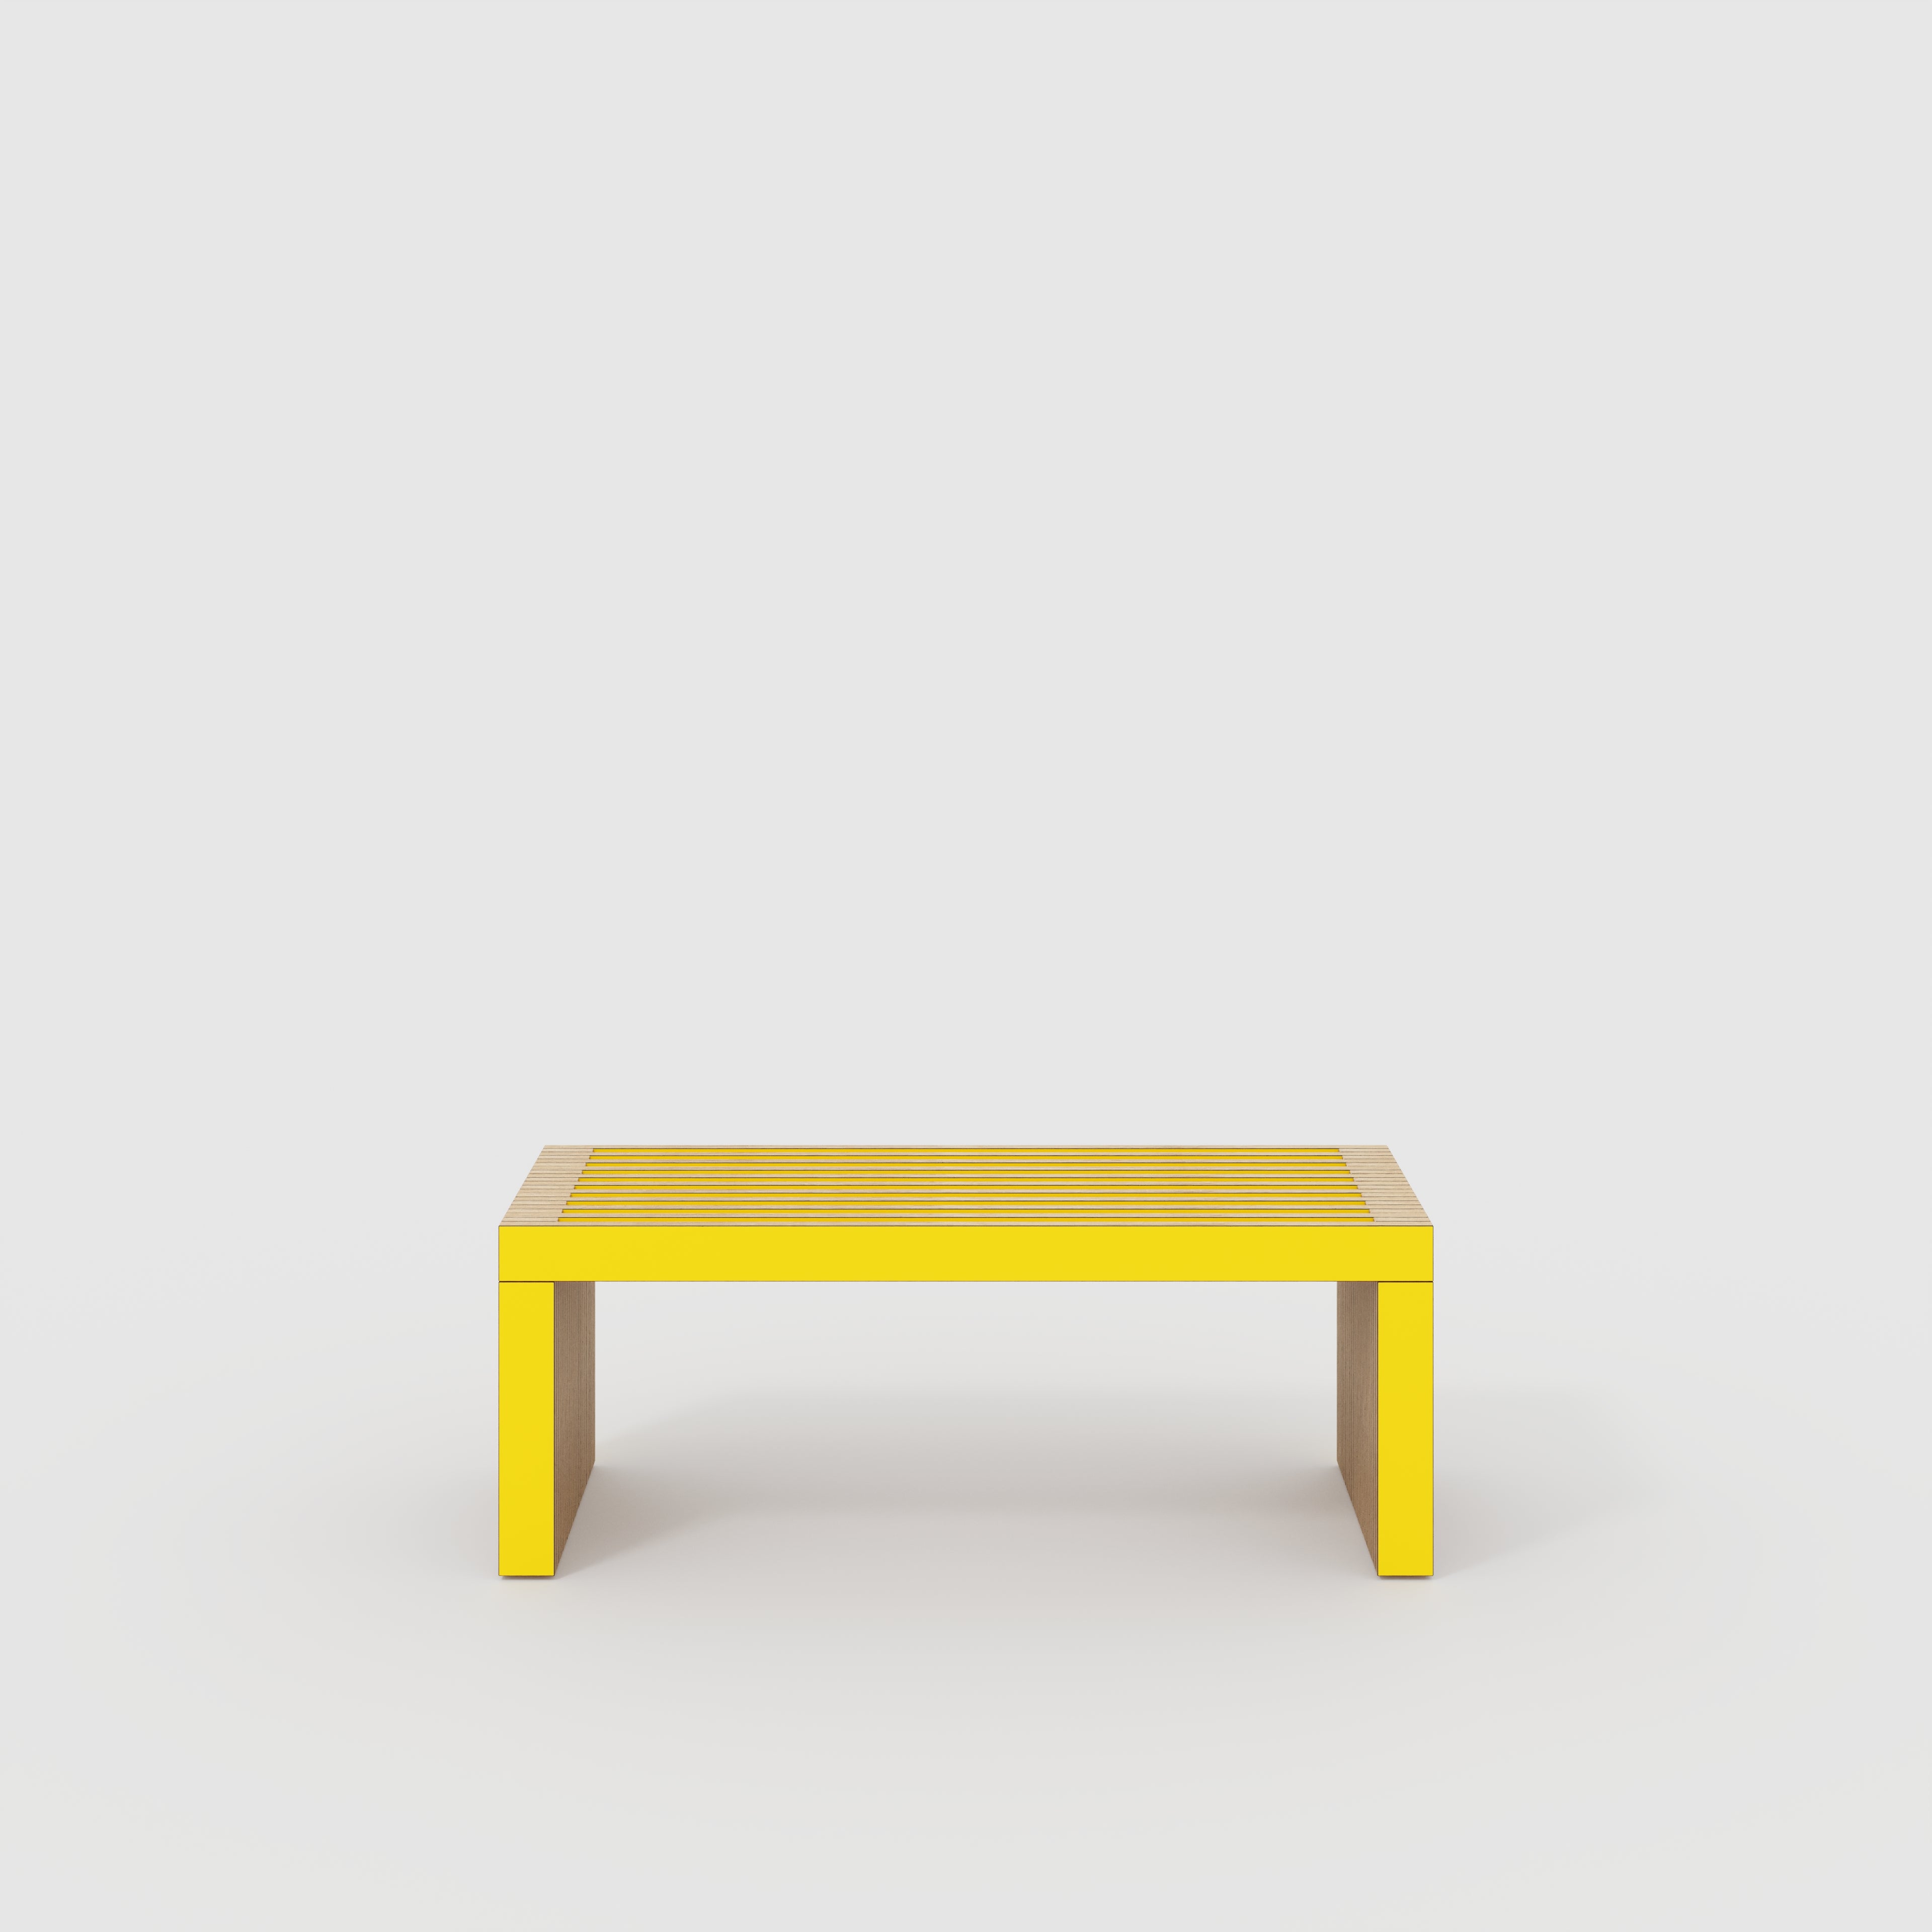 Bench Seat with Slats - Formica Chrome Yellow - 1200(w) x 410(d) x 450(h)